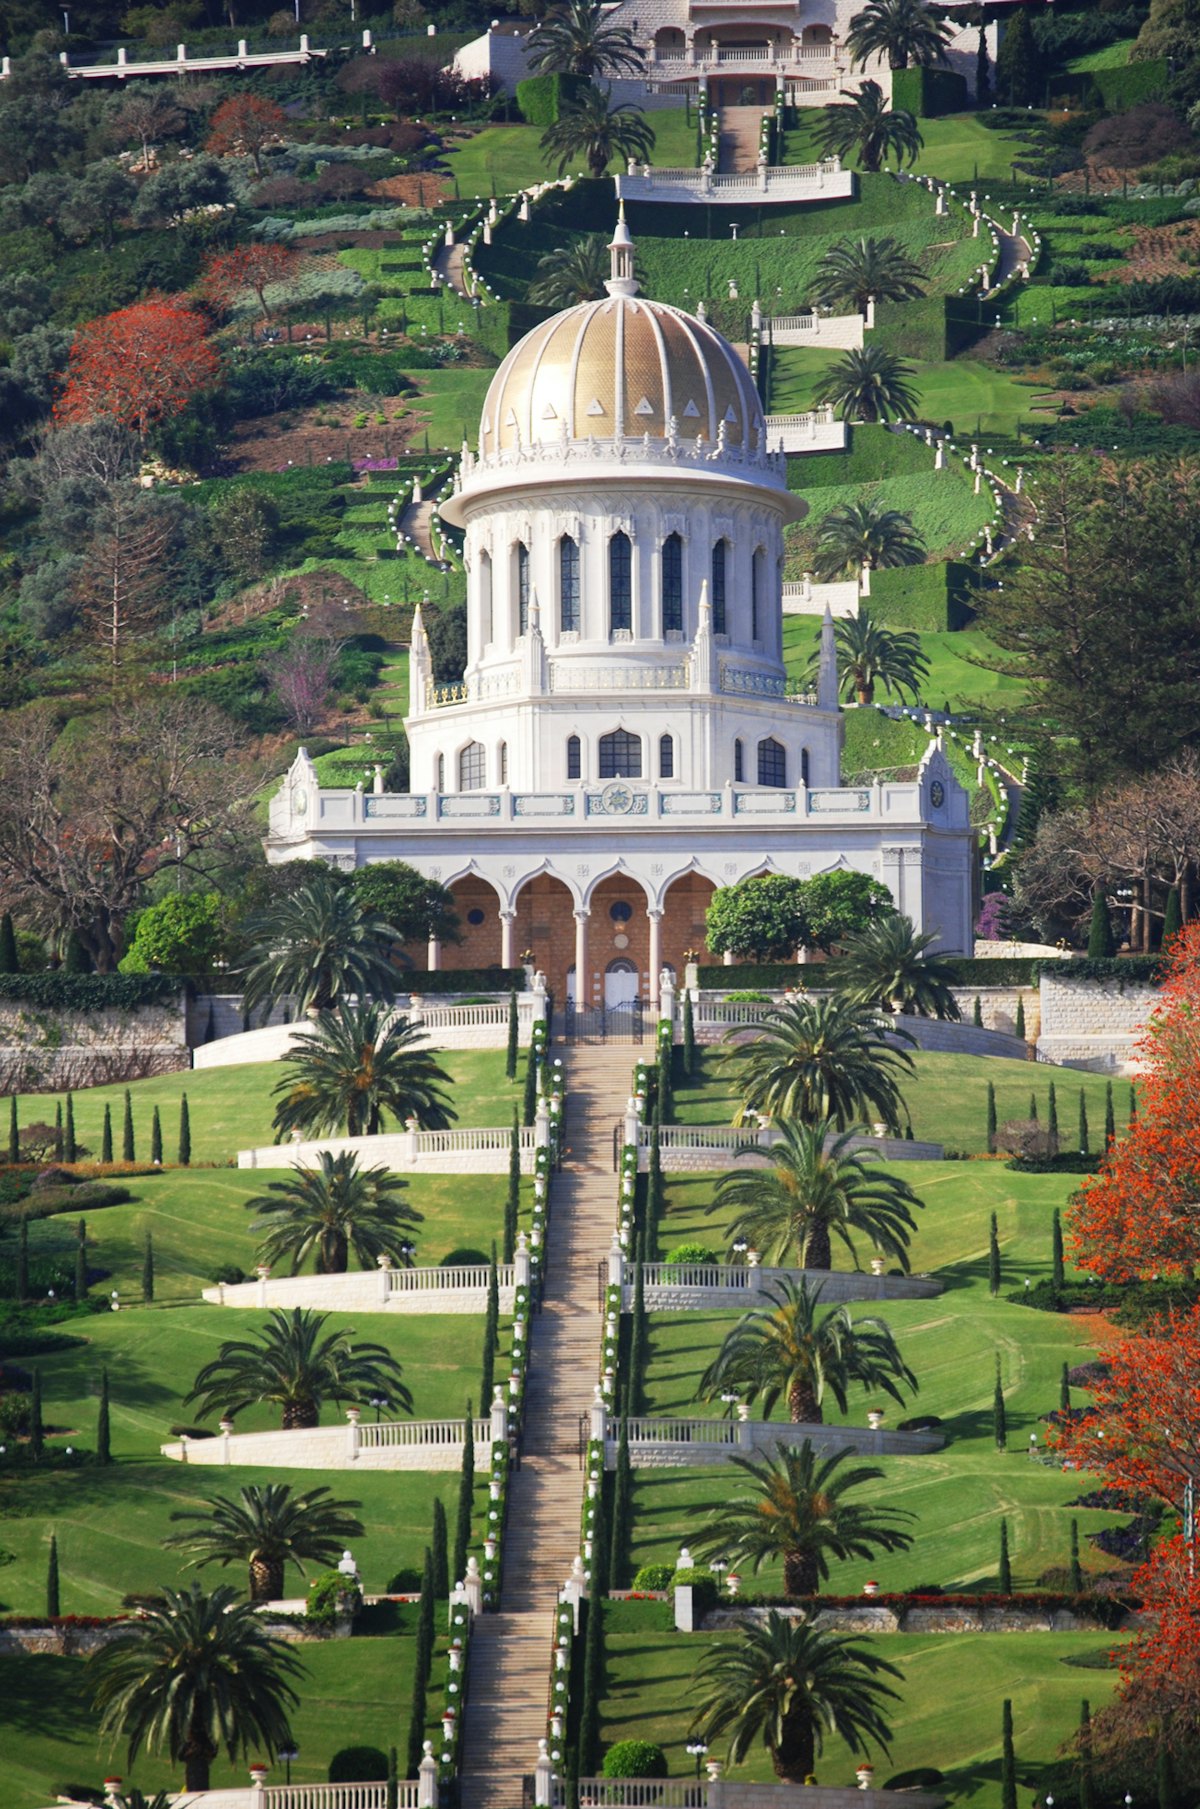 Members of the Continental Boards of Counsellors have gathered at the Baha'i World Centre for the momentous Counsellors Conference, which began this morning. For three days prior, they visited the sacred Baha'i Shrines and holy places in preparation for the conference.